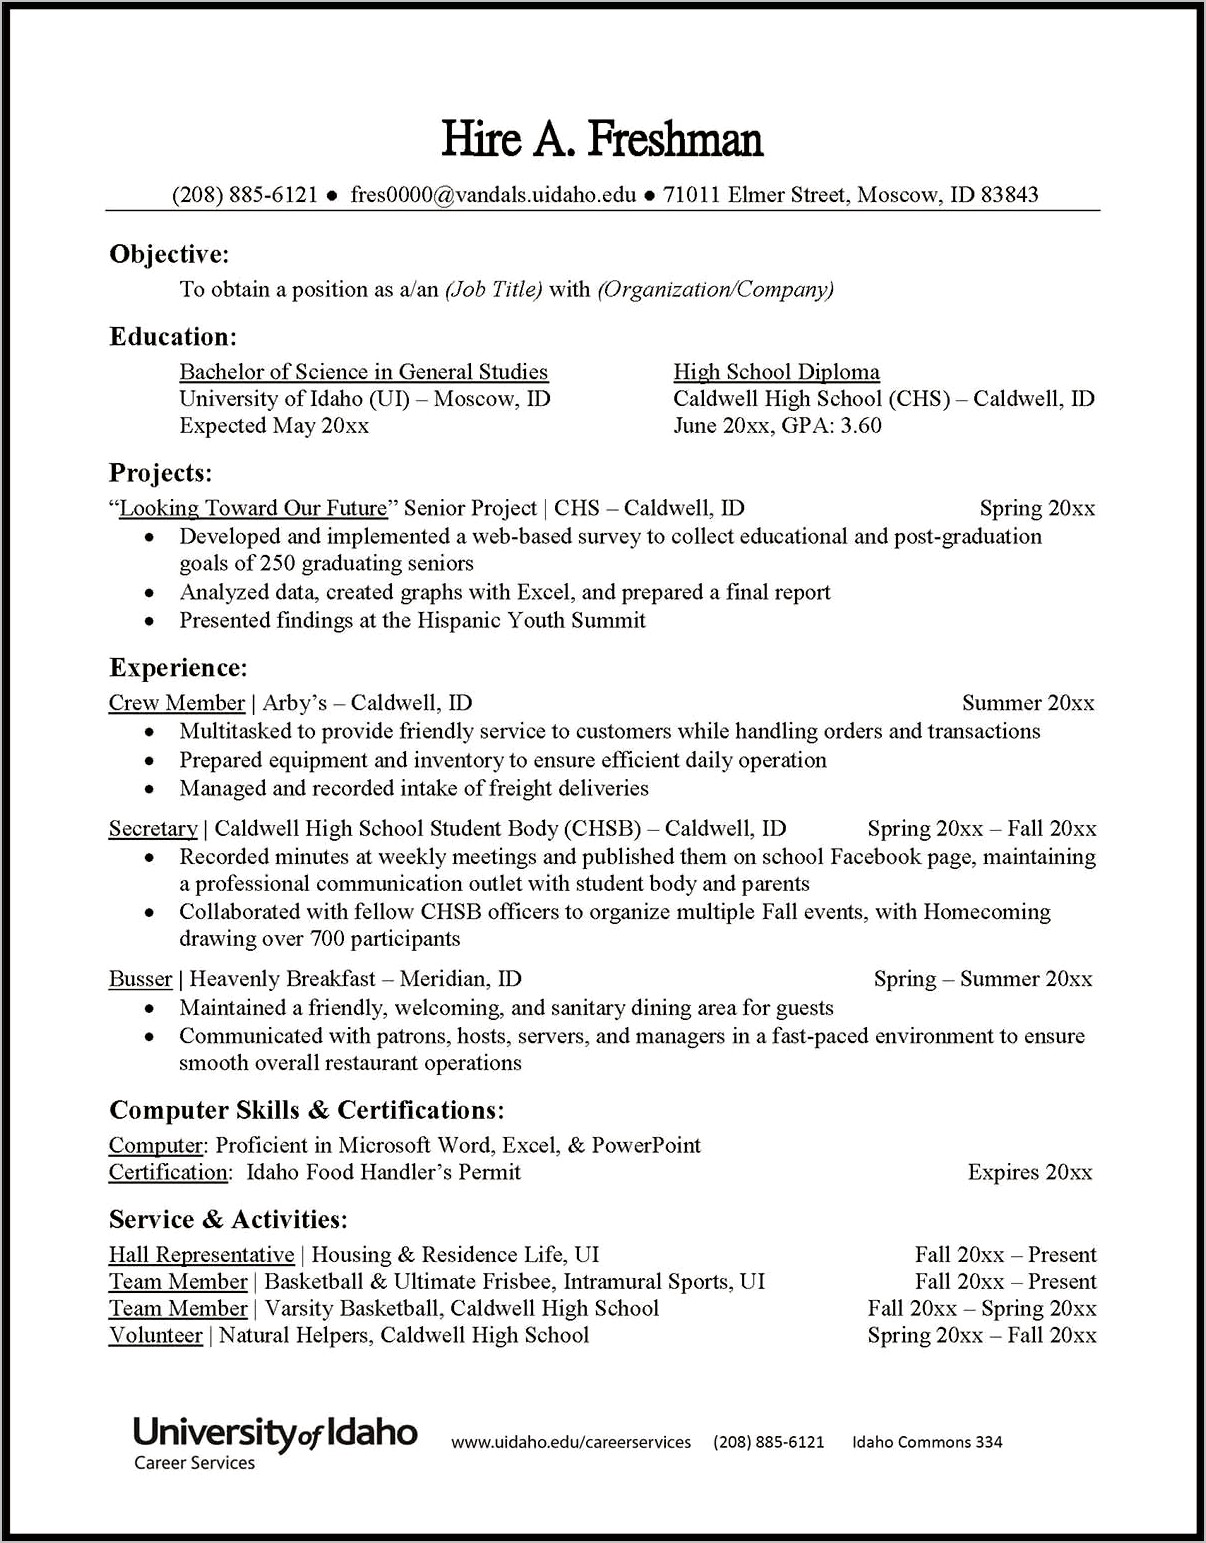 Sample Resume With Graduation Date